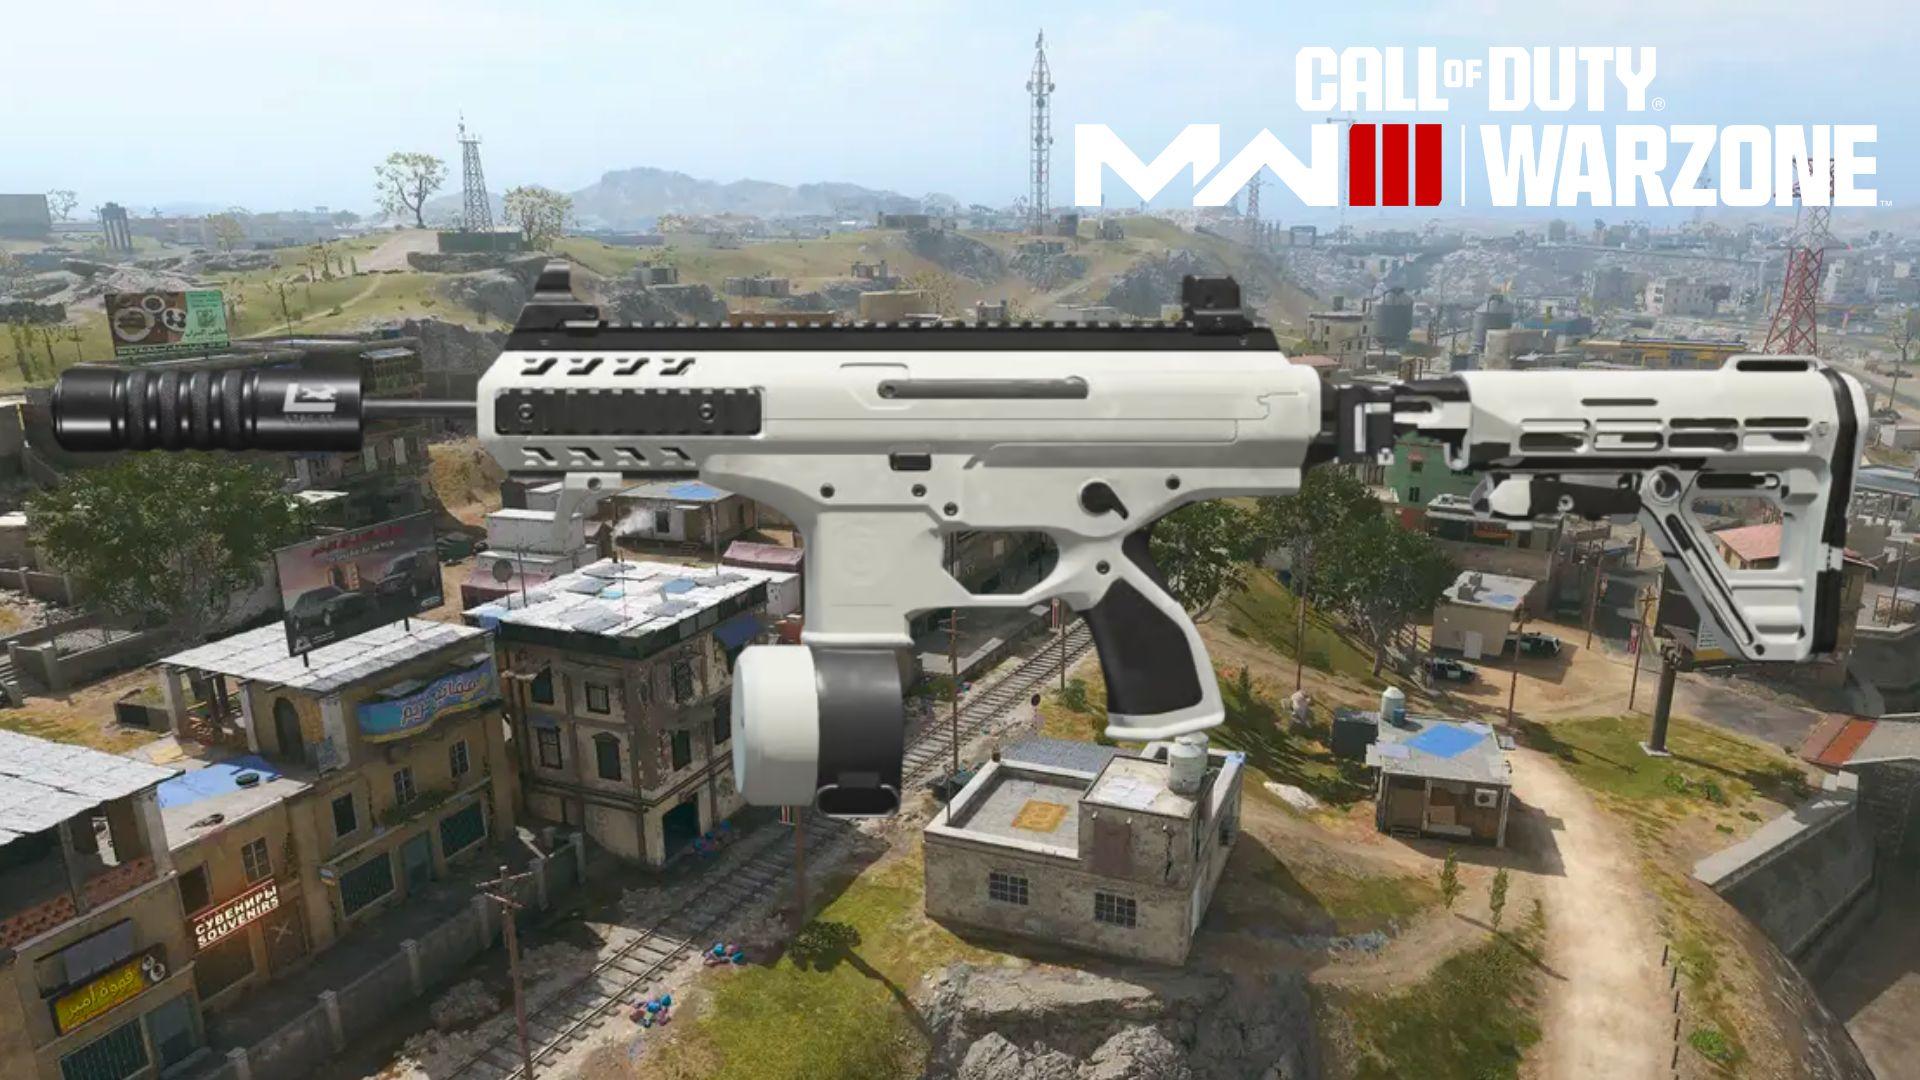 White HRM-9 SMG in Warzone